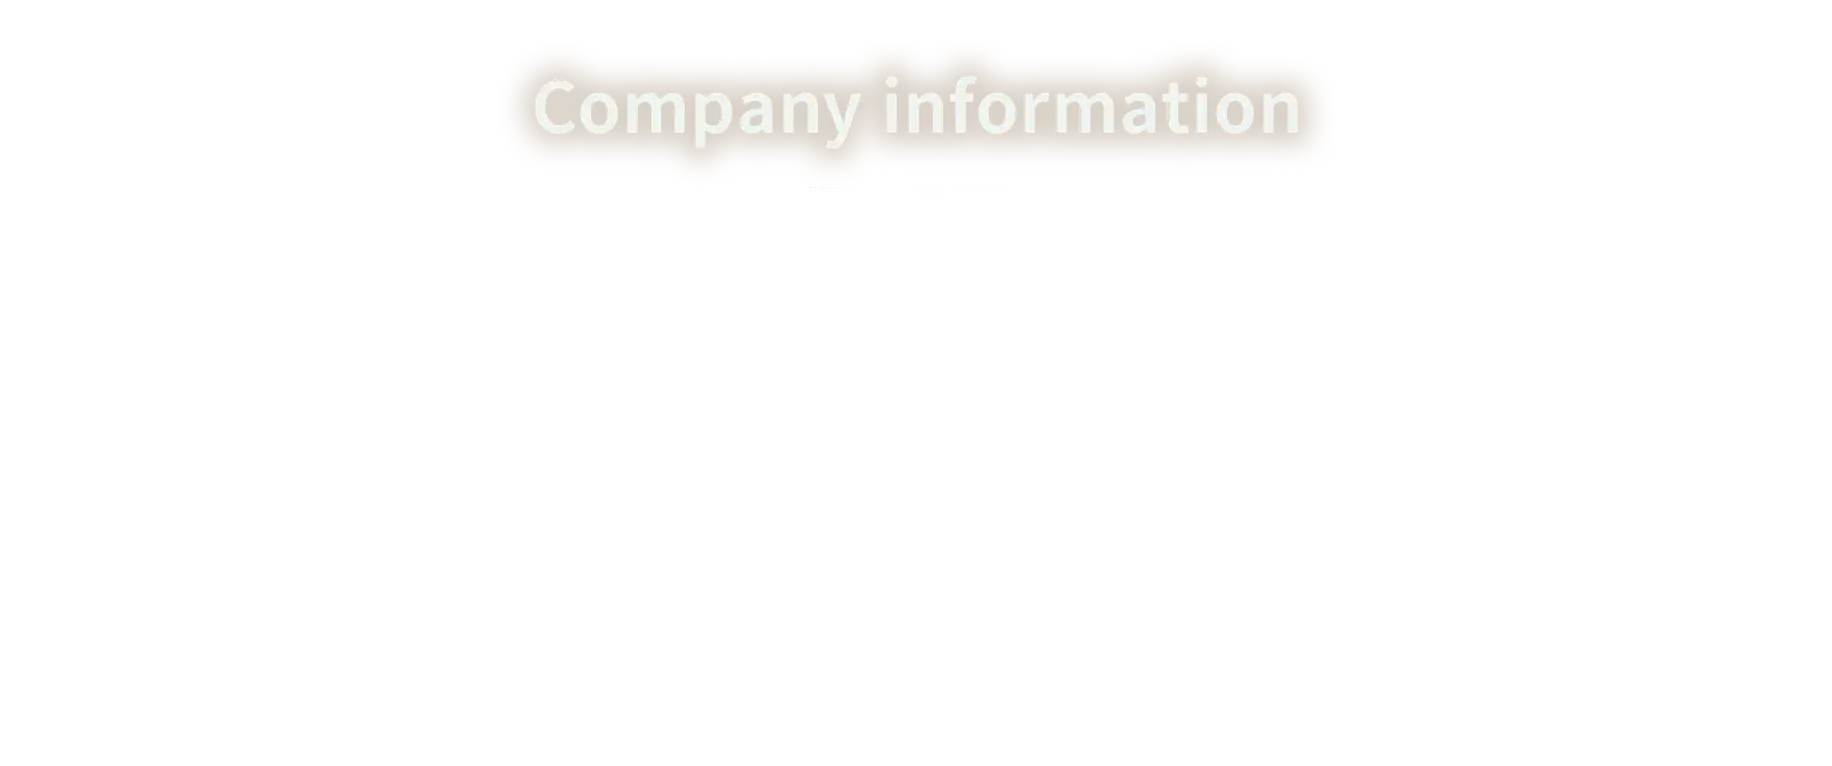 Company Information Joy for Life Bringing joy to the future by food